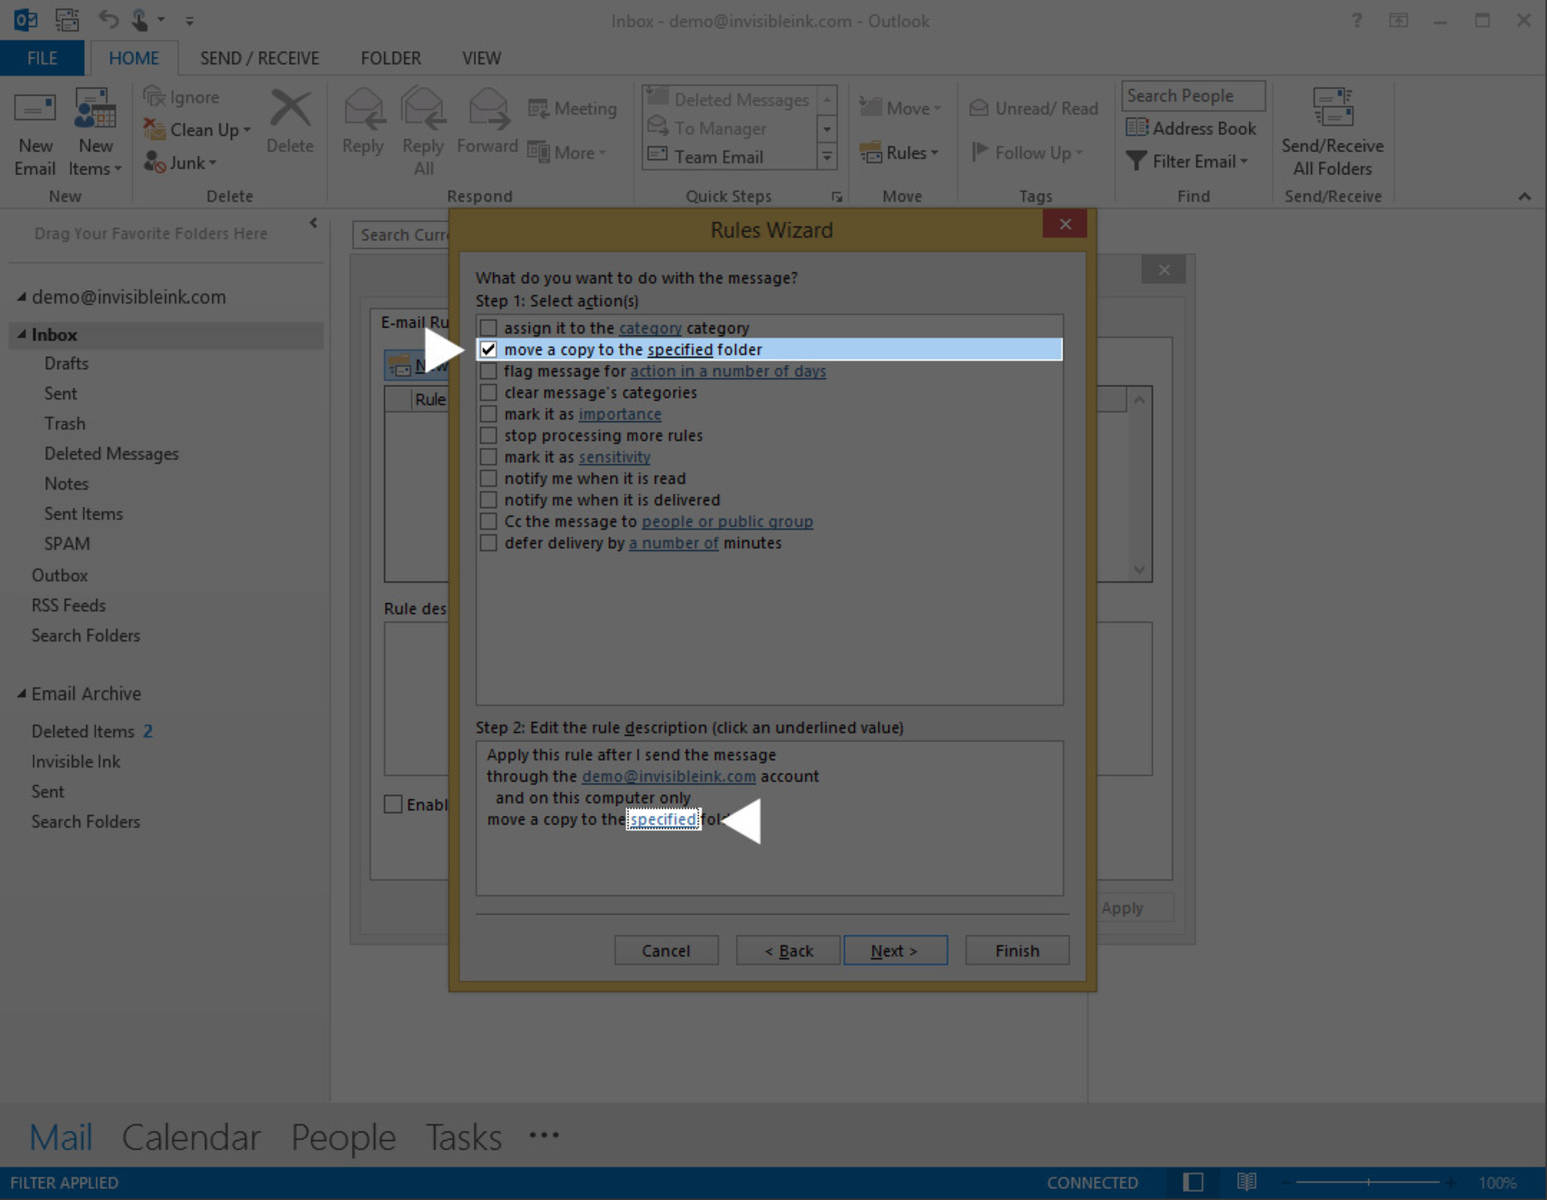 Part 1, Step 7: Check the box next to “move a copy to the specified folder”, then click on the word “specified”at the bottom of this window to select a folder.